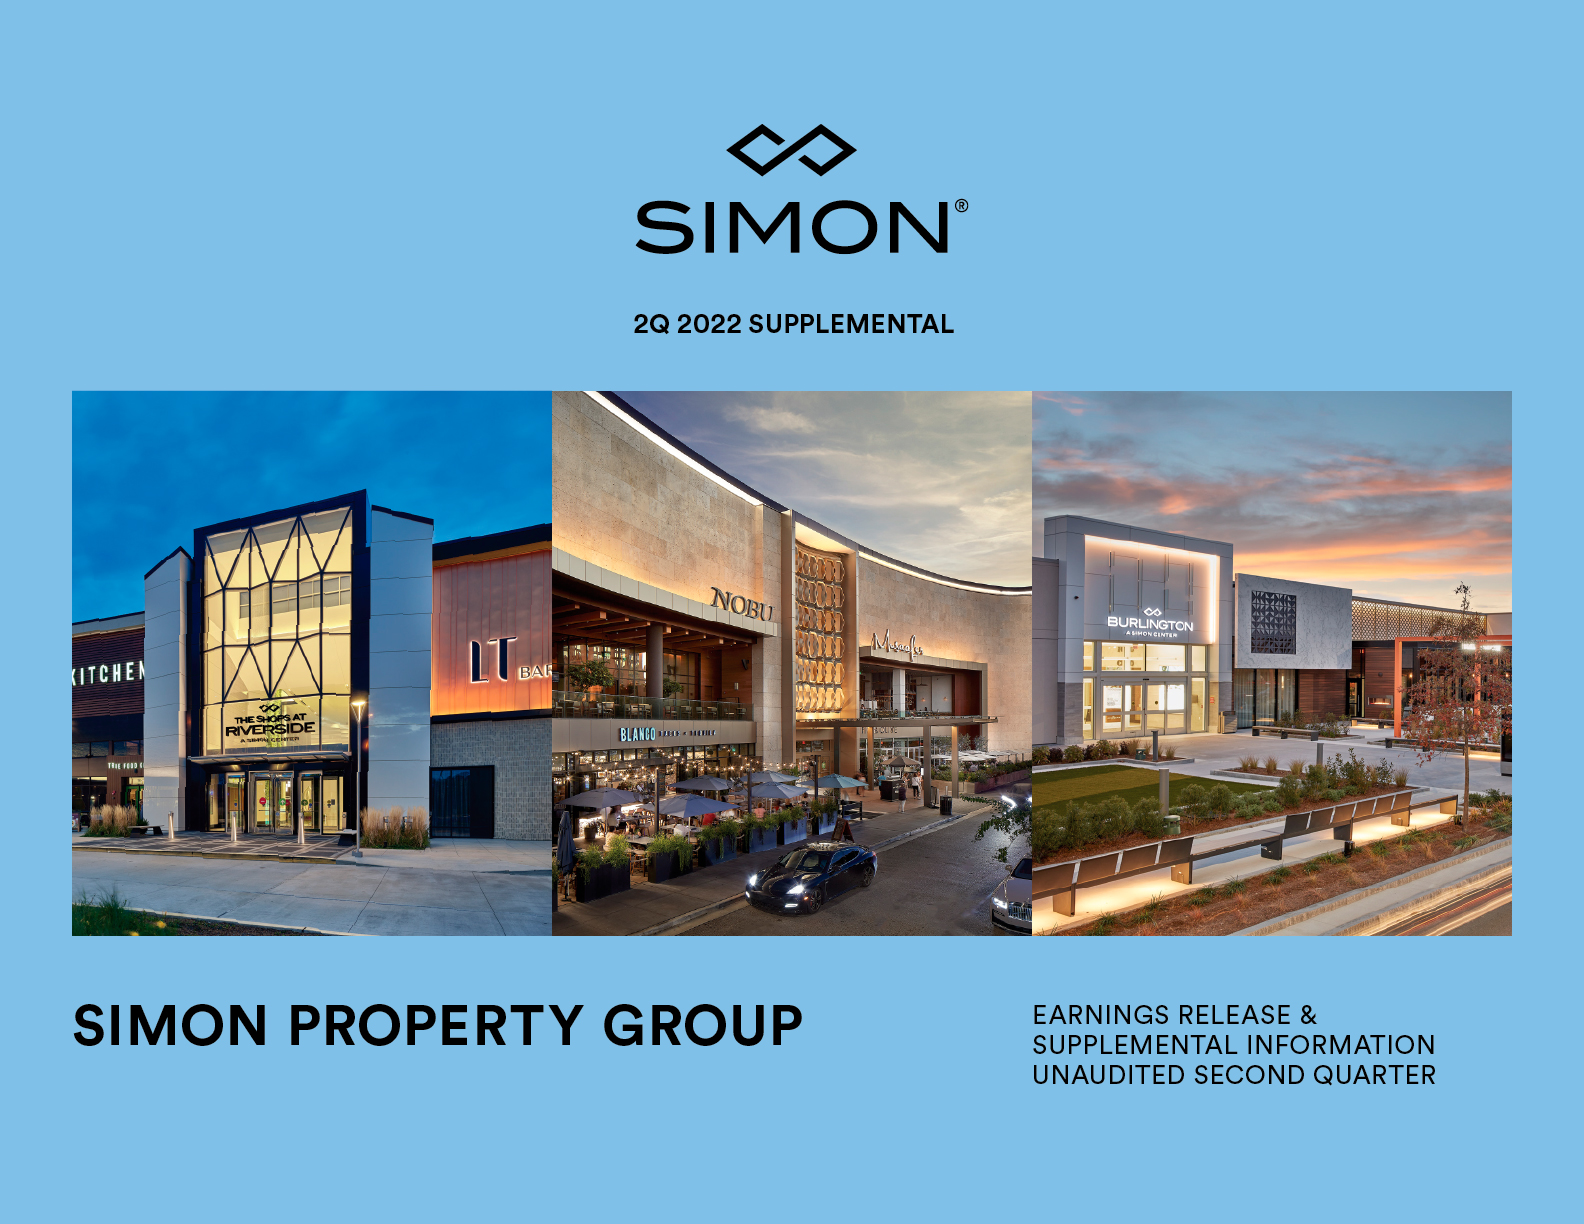 Leasing & Advertising at The Shops At Clearfork, a SIMON Center